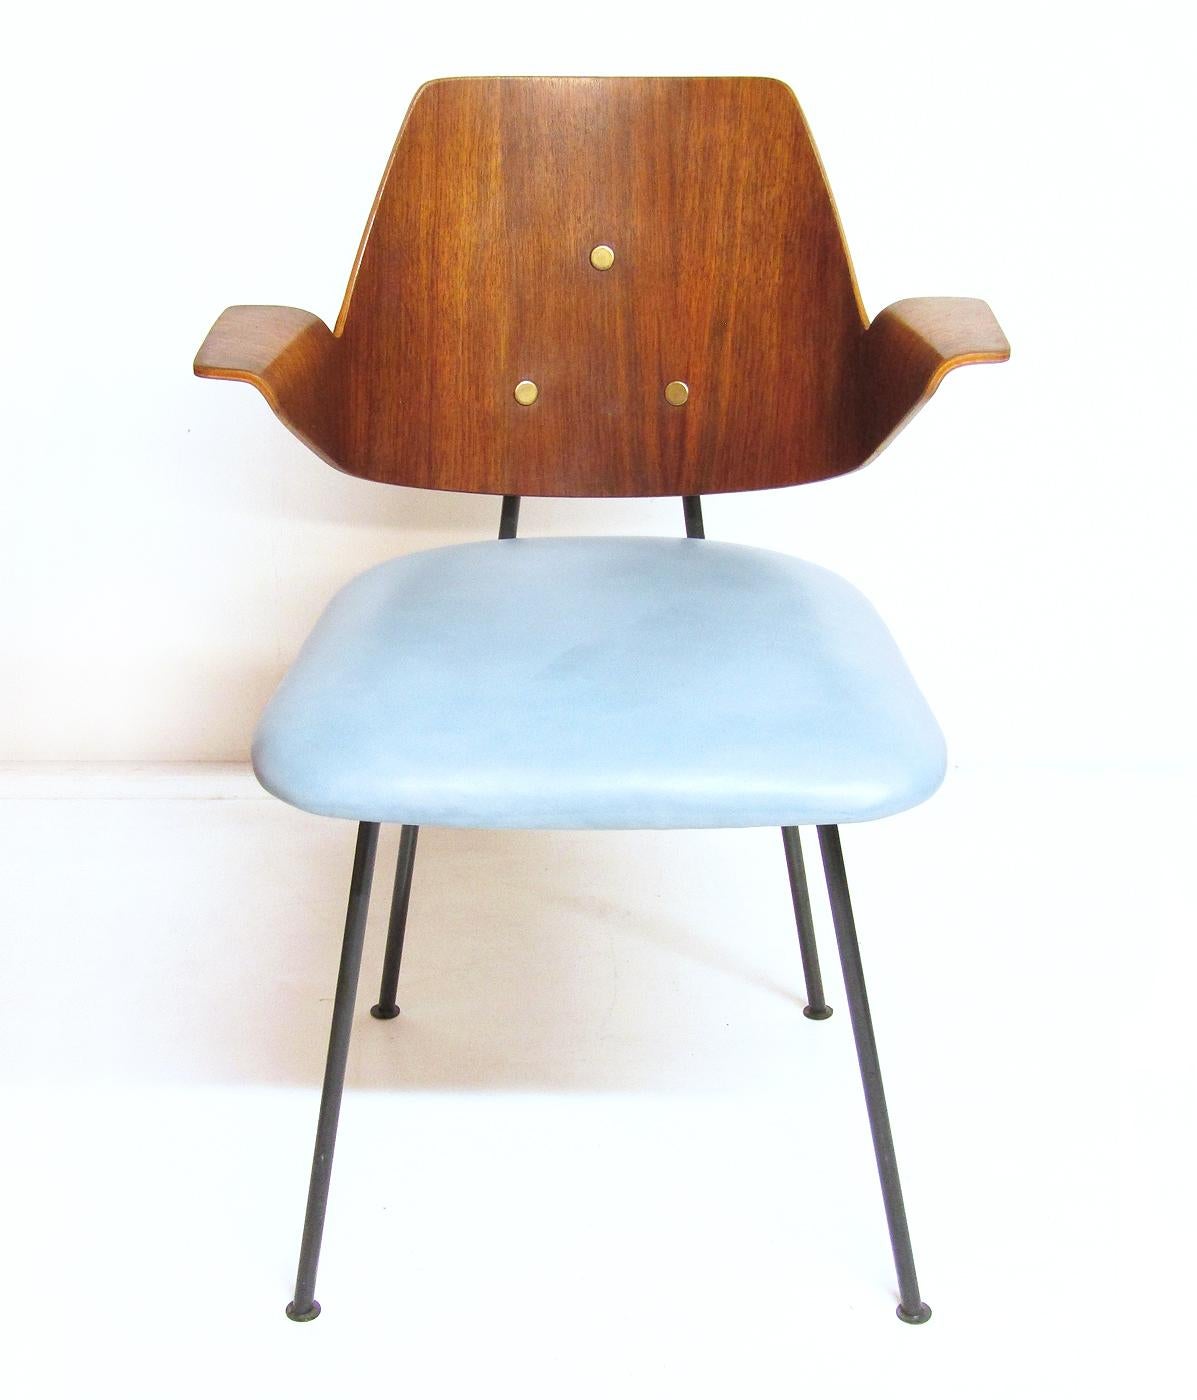 1950s Modernist Desk & Chair Set in Walnut & Leather by Robin Day for Hille 1